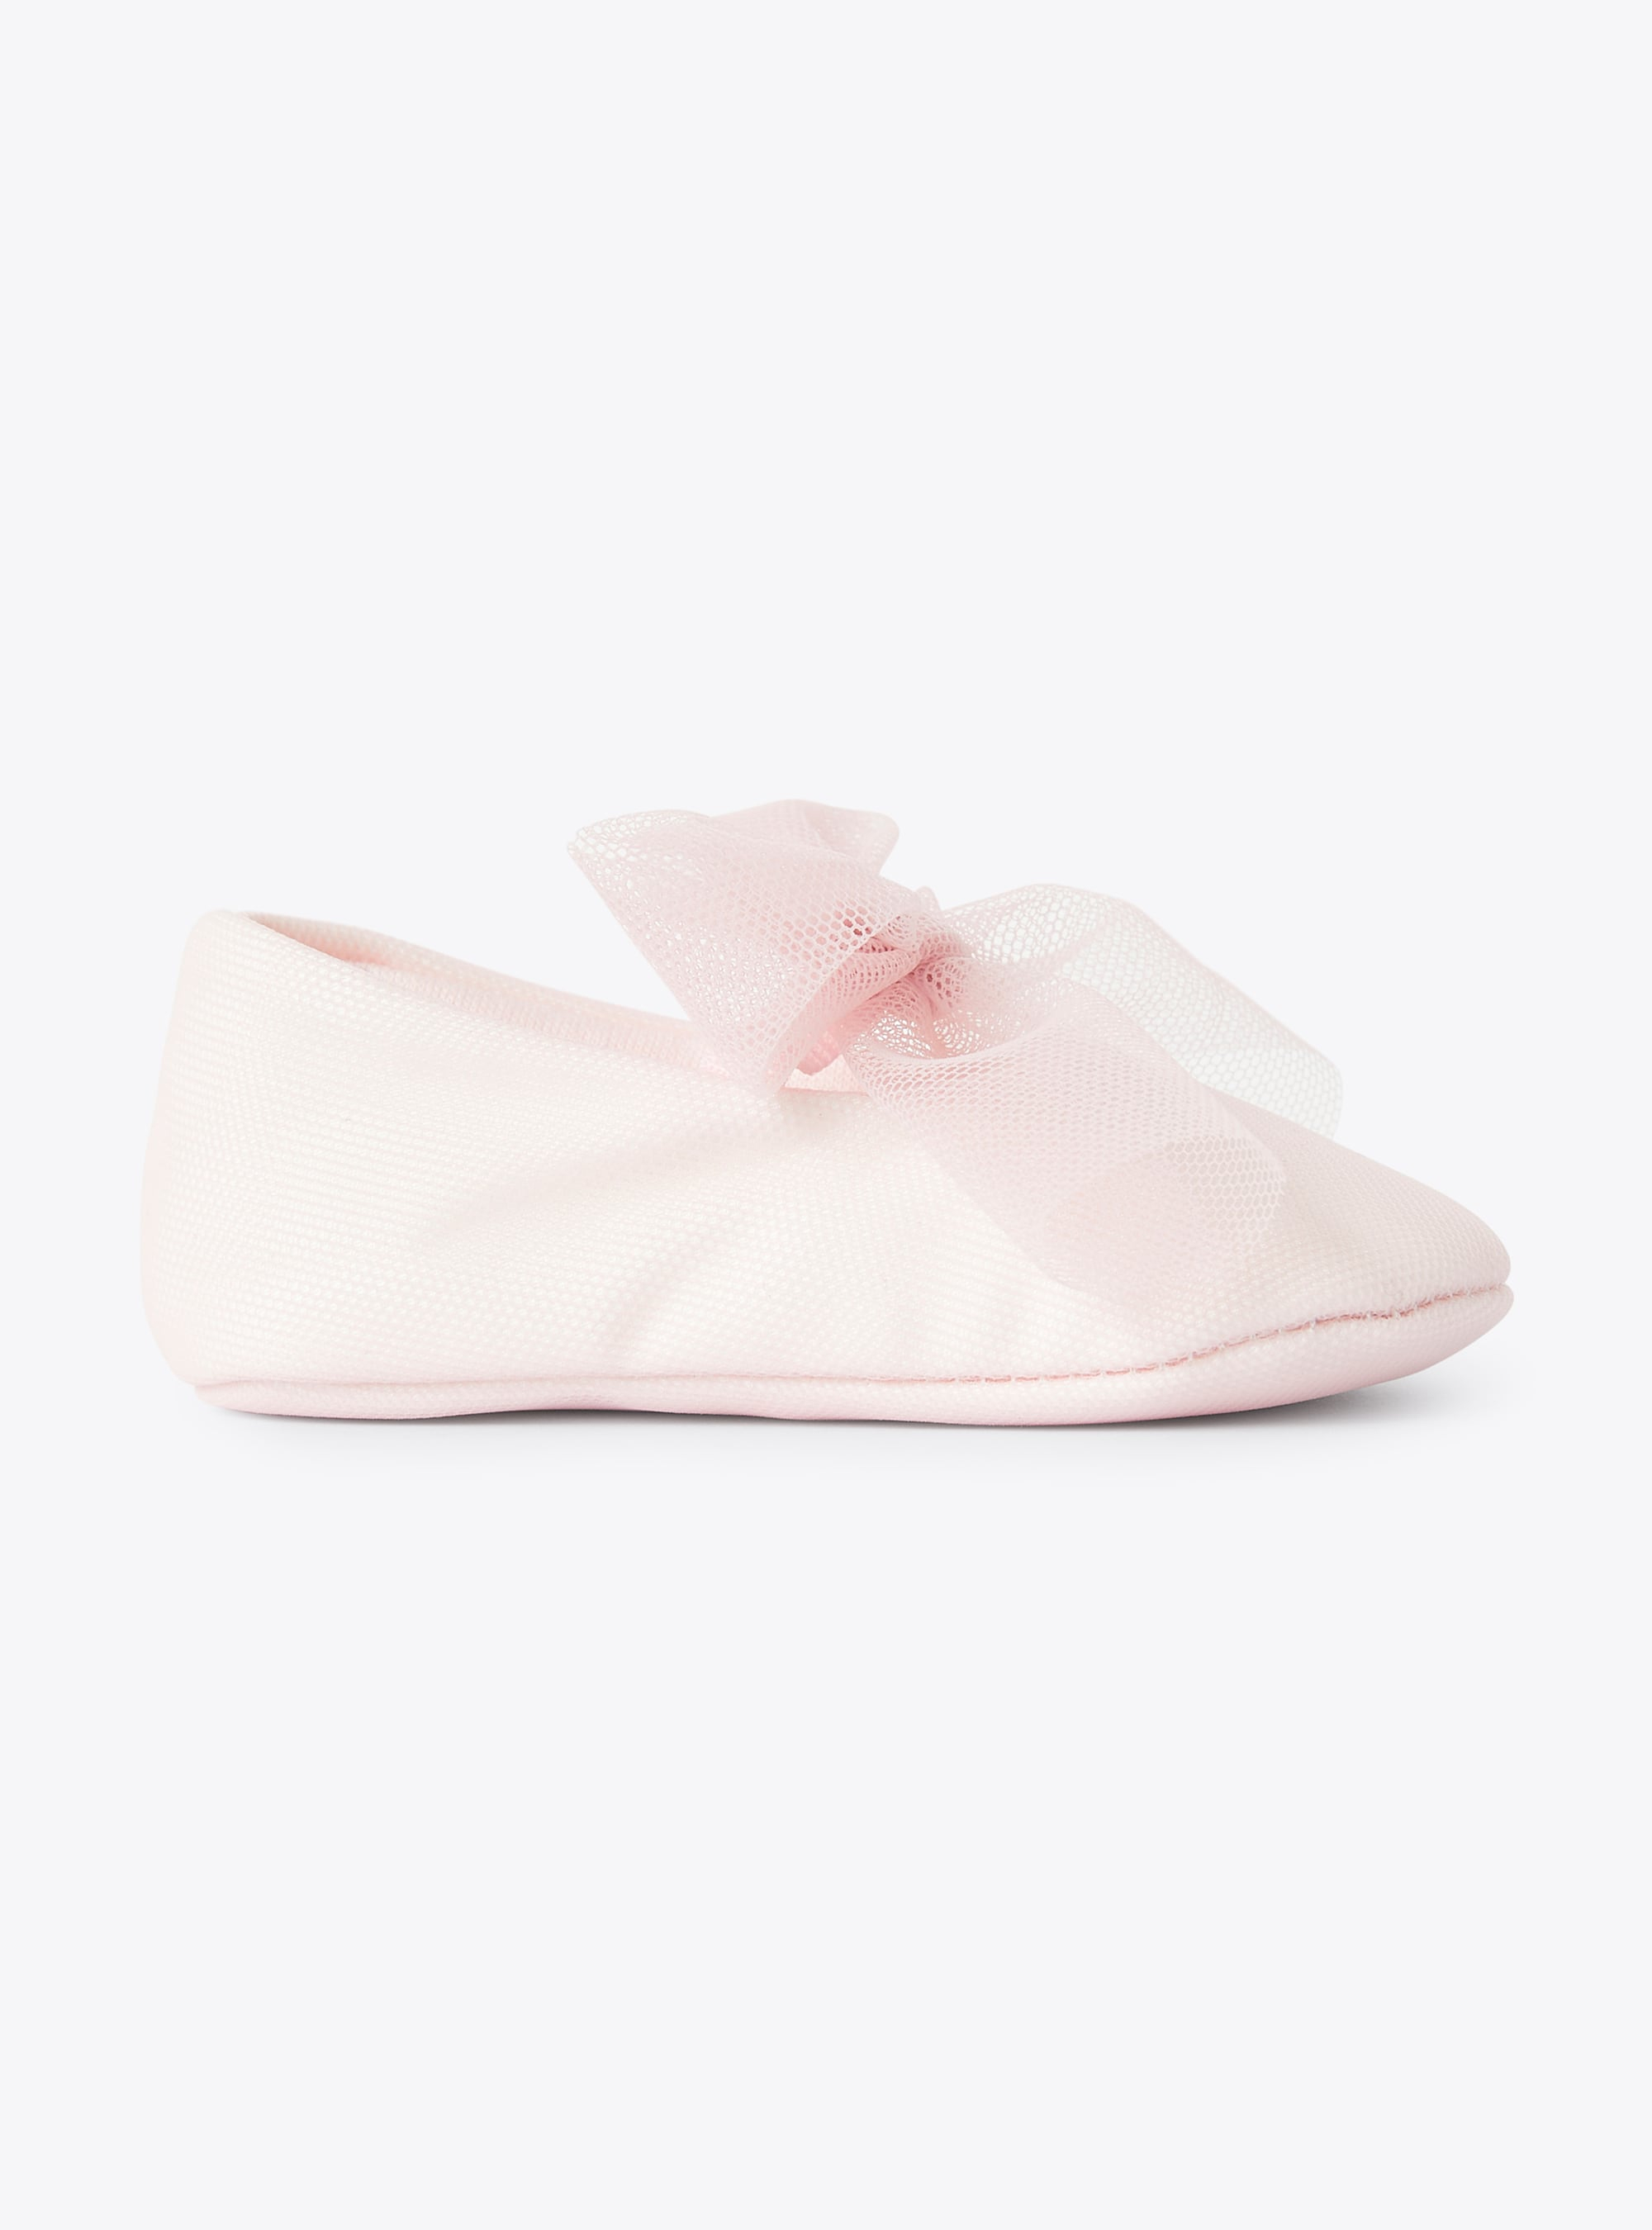 Shoe for baby girls with a pink tulle bow embellishment - Pink | Il Gufo